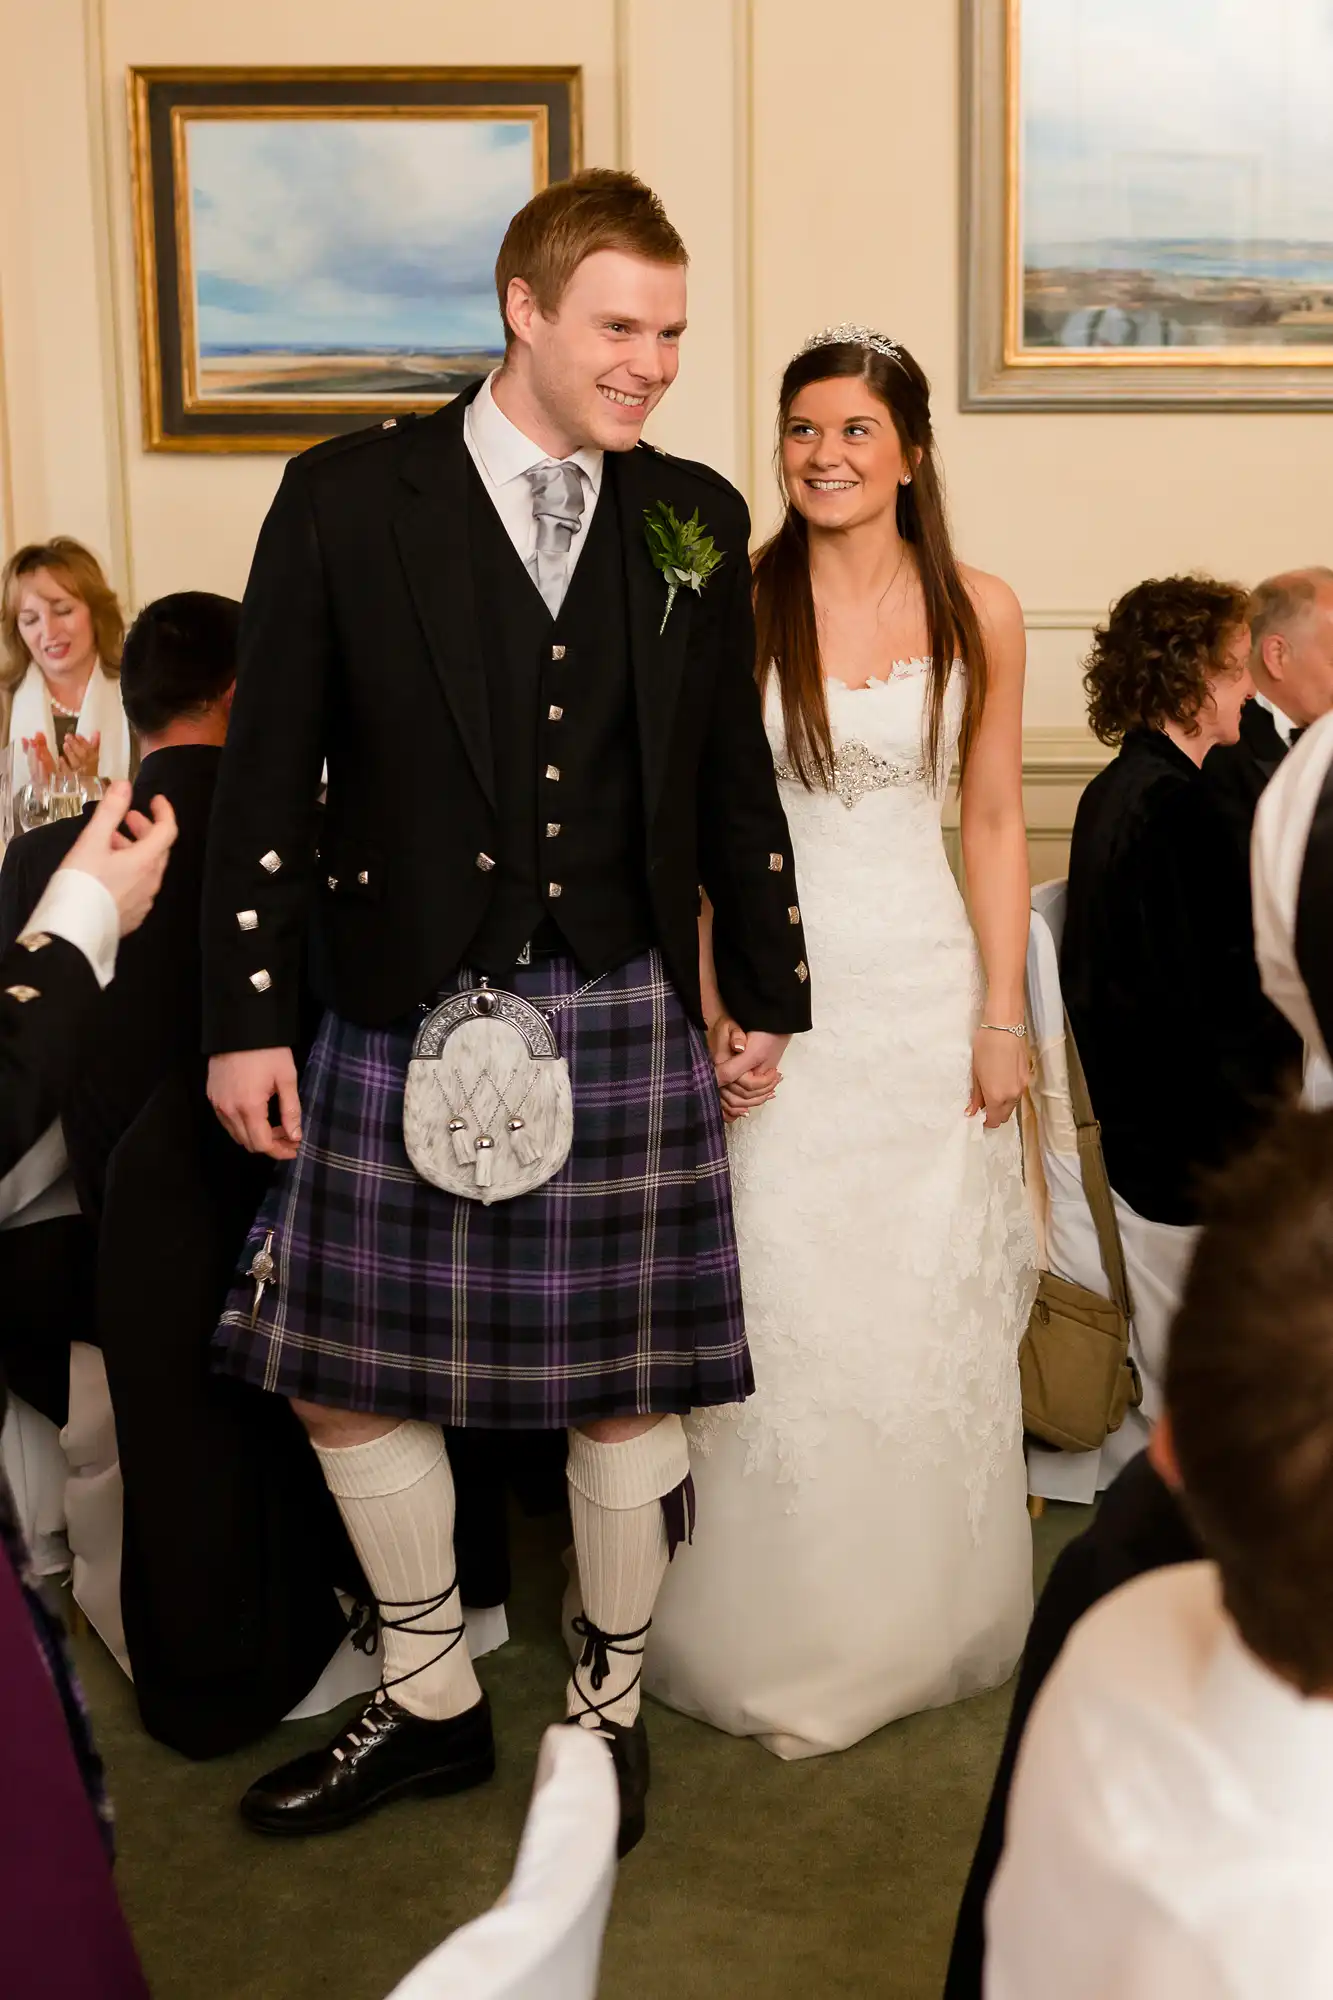 A bride in a white wedding dress and a groom in a traditional scottish kilt and jacket smile as they walk through a room of seated guests.